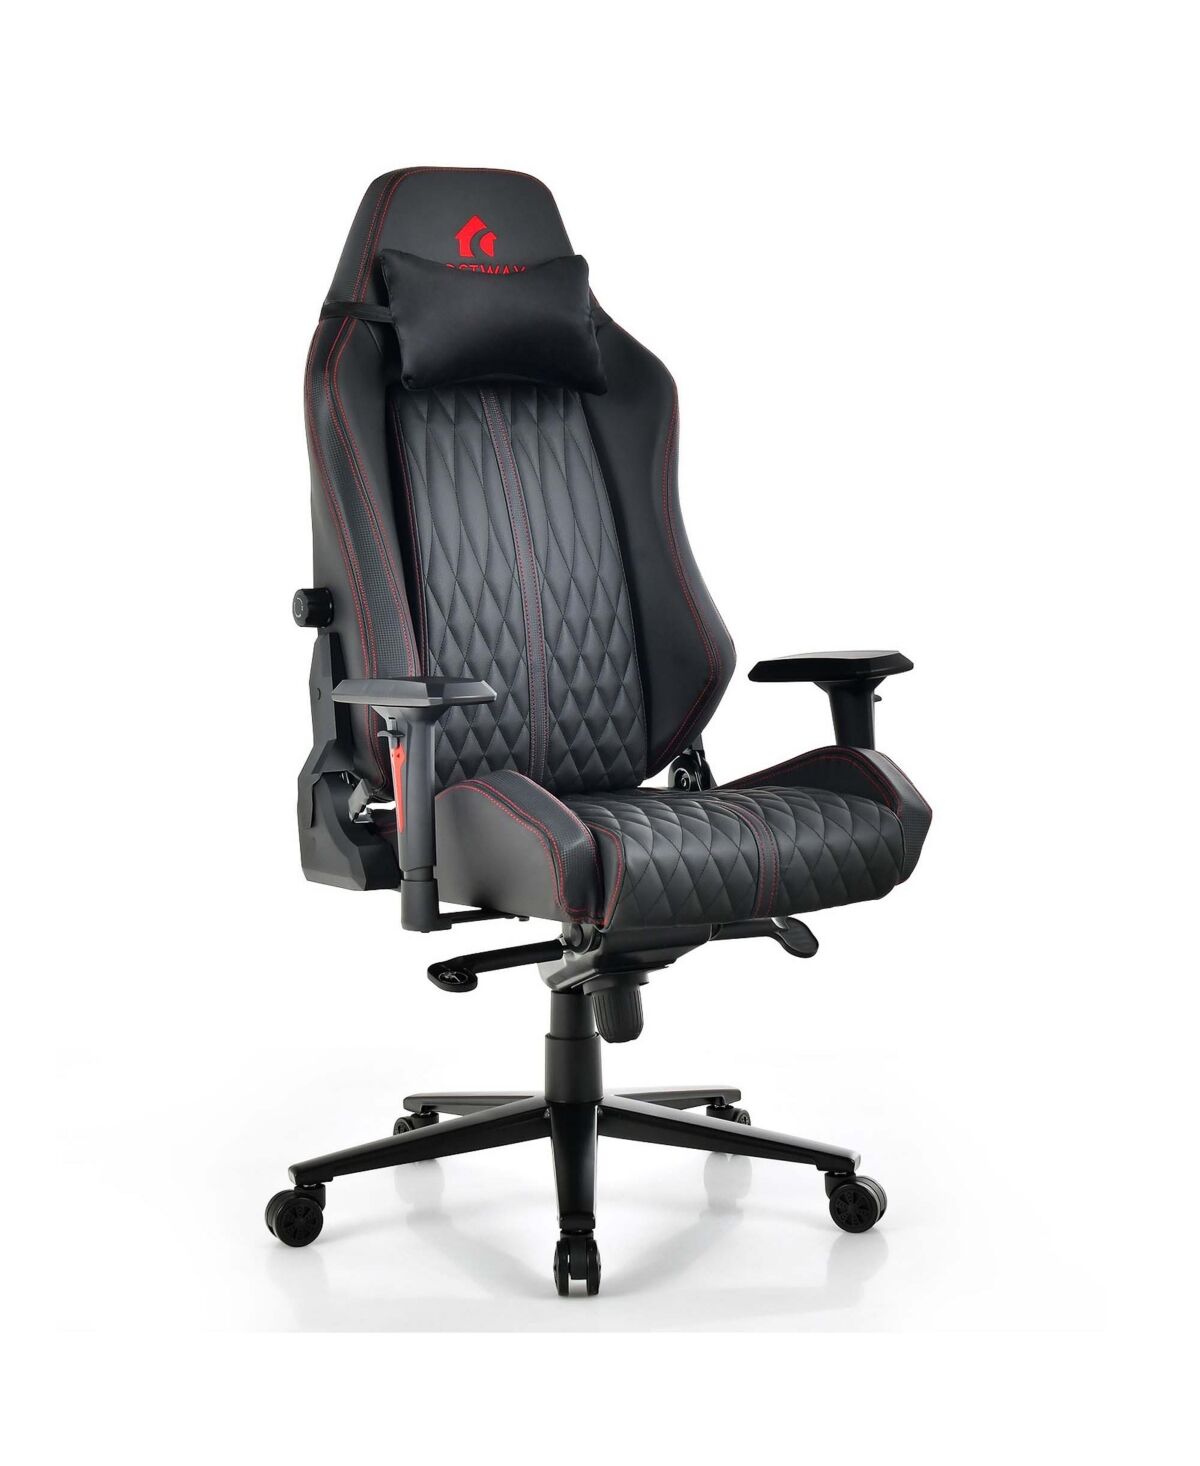 Costway Gaming Chair with Meta Base Class-4 Gas Lift 4D Armrest & Adjustable Lumbar Support - Black